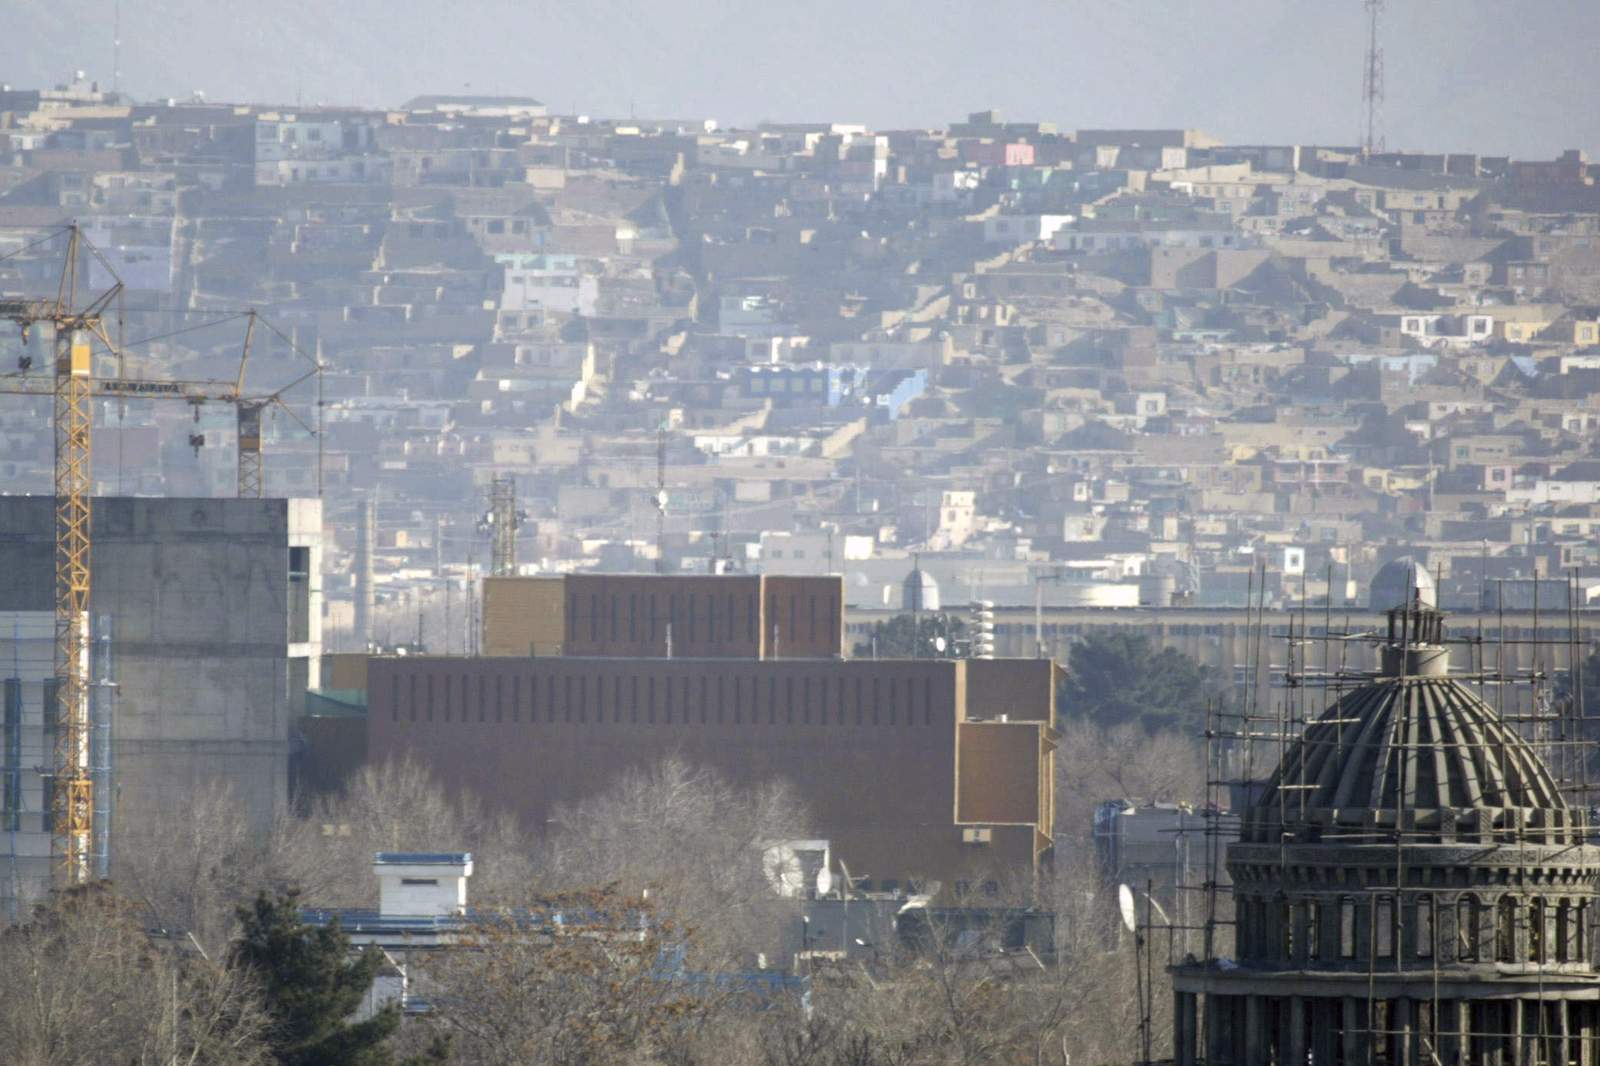 US Embassy in Kabul battling COVID-19 infections